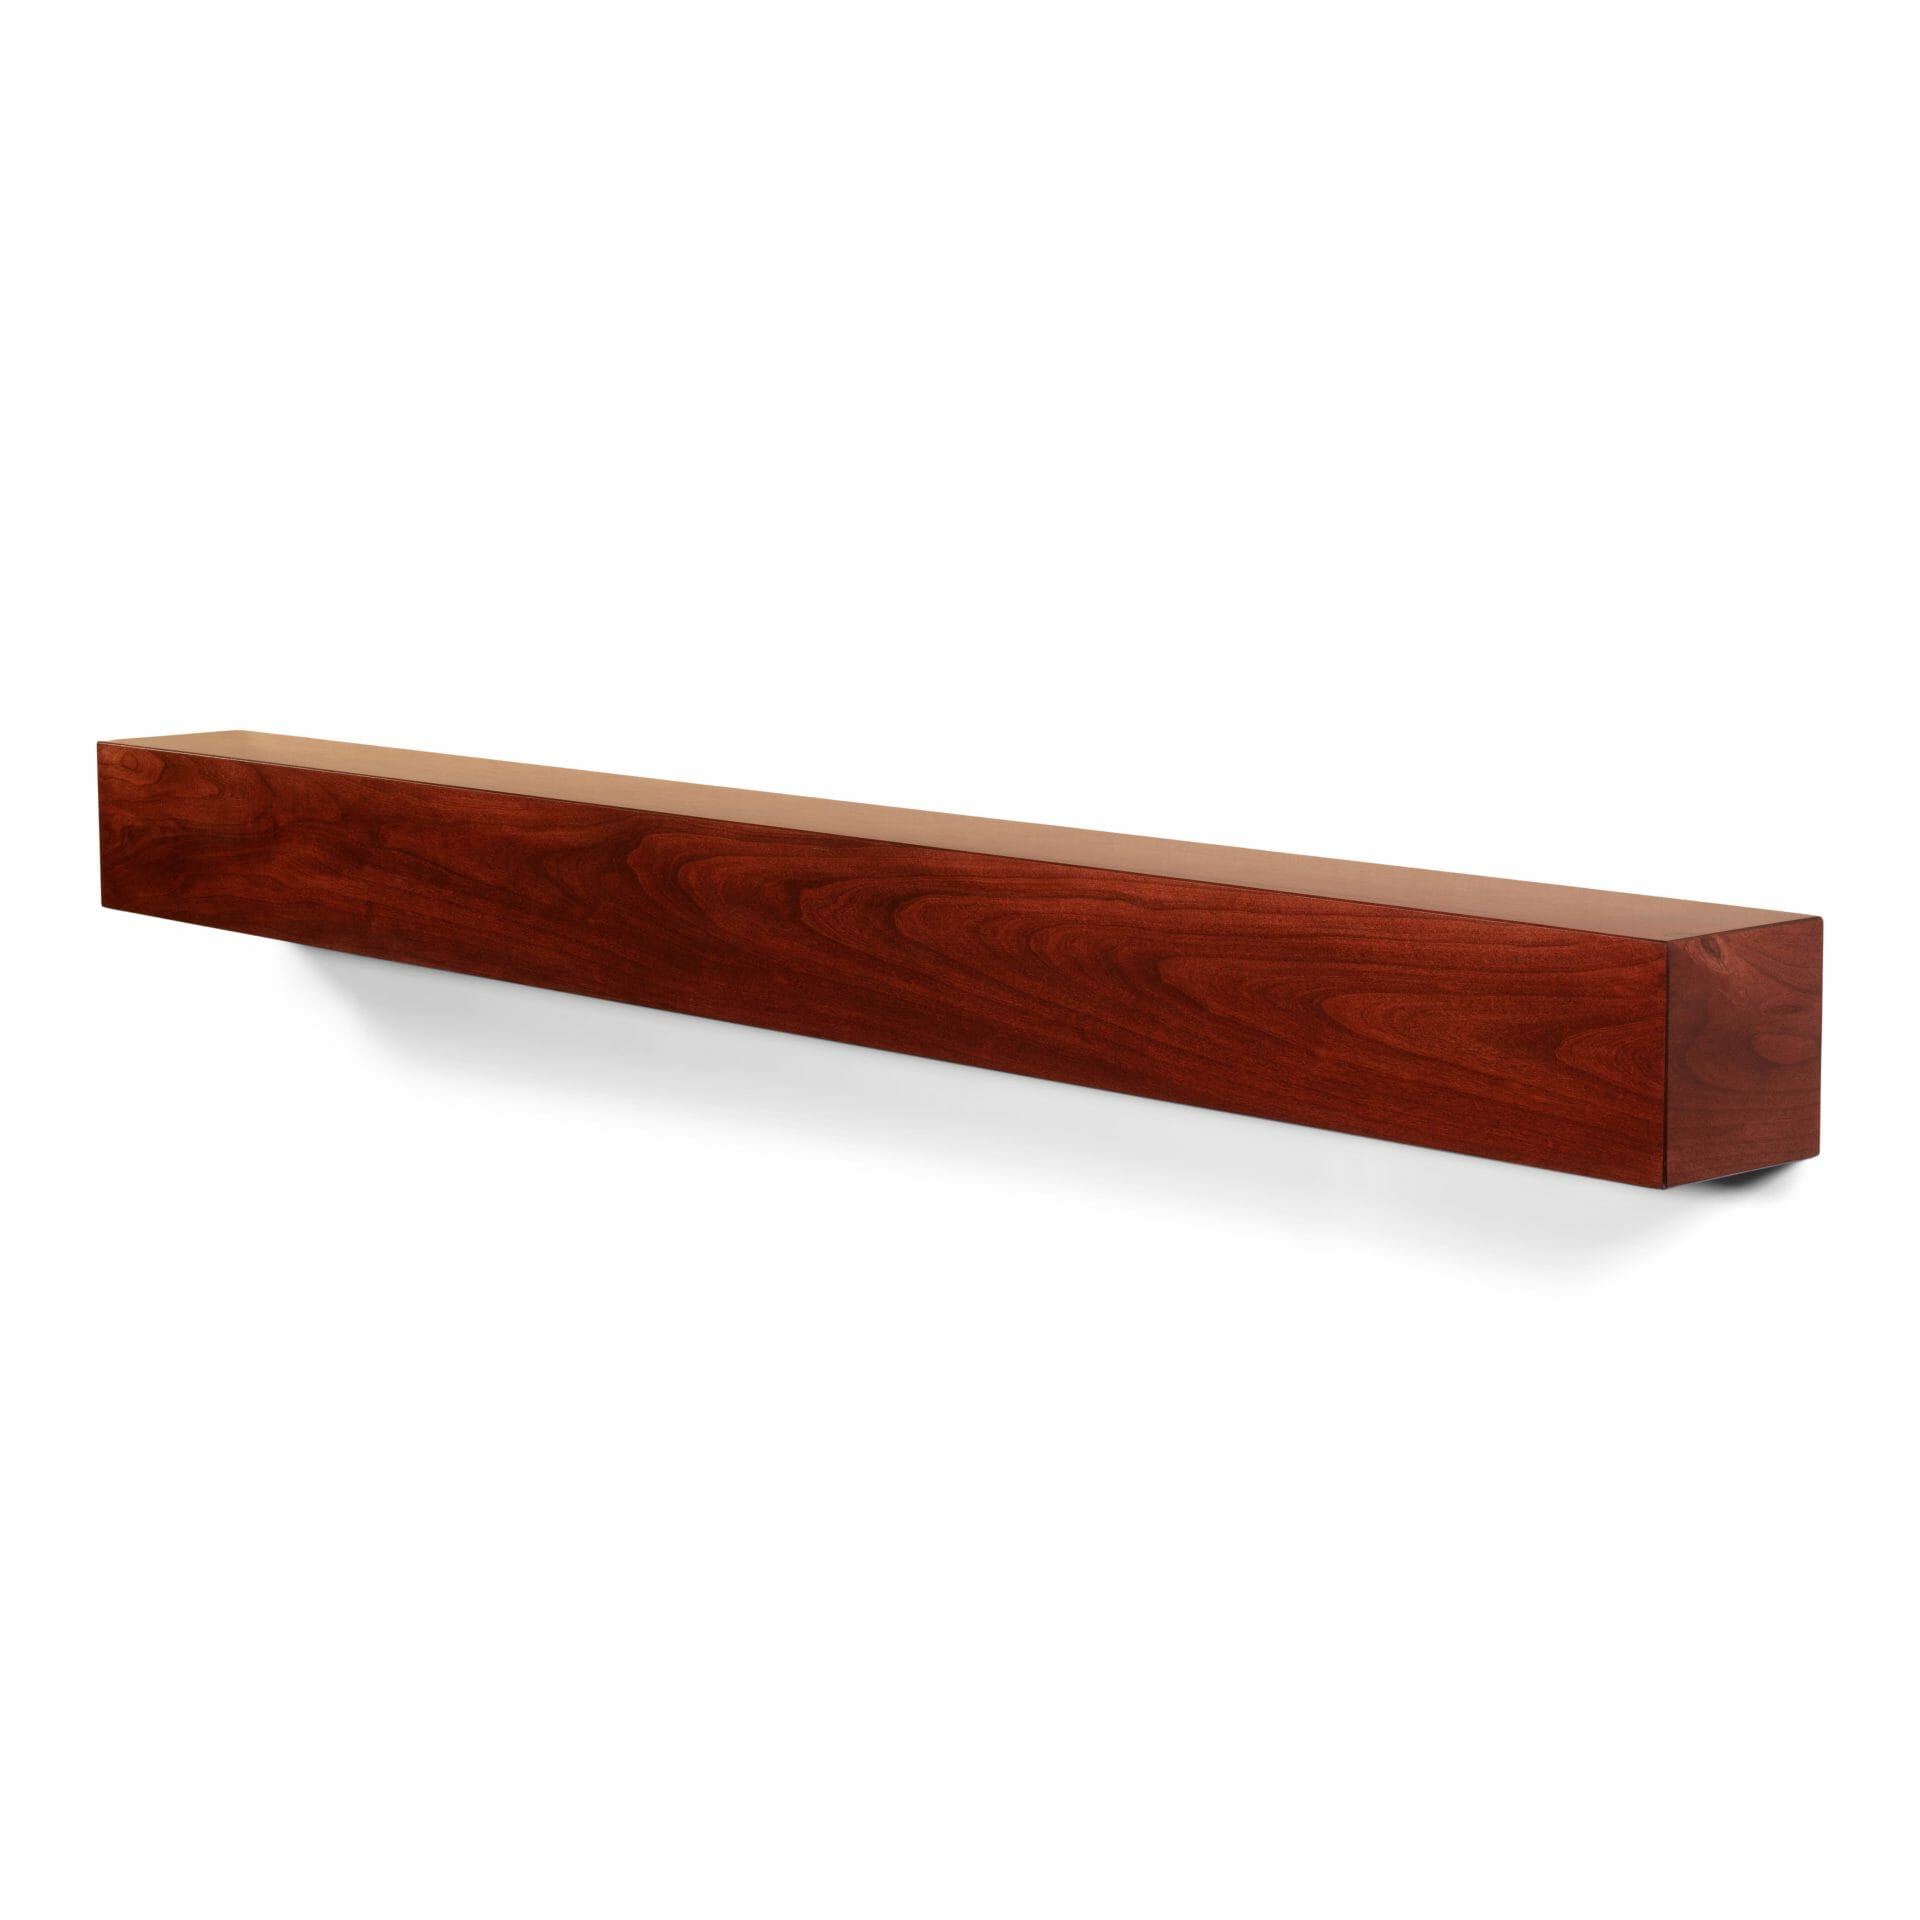 cherry wood mantel in chianti red color